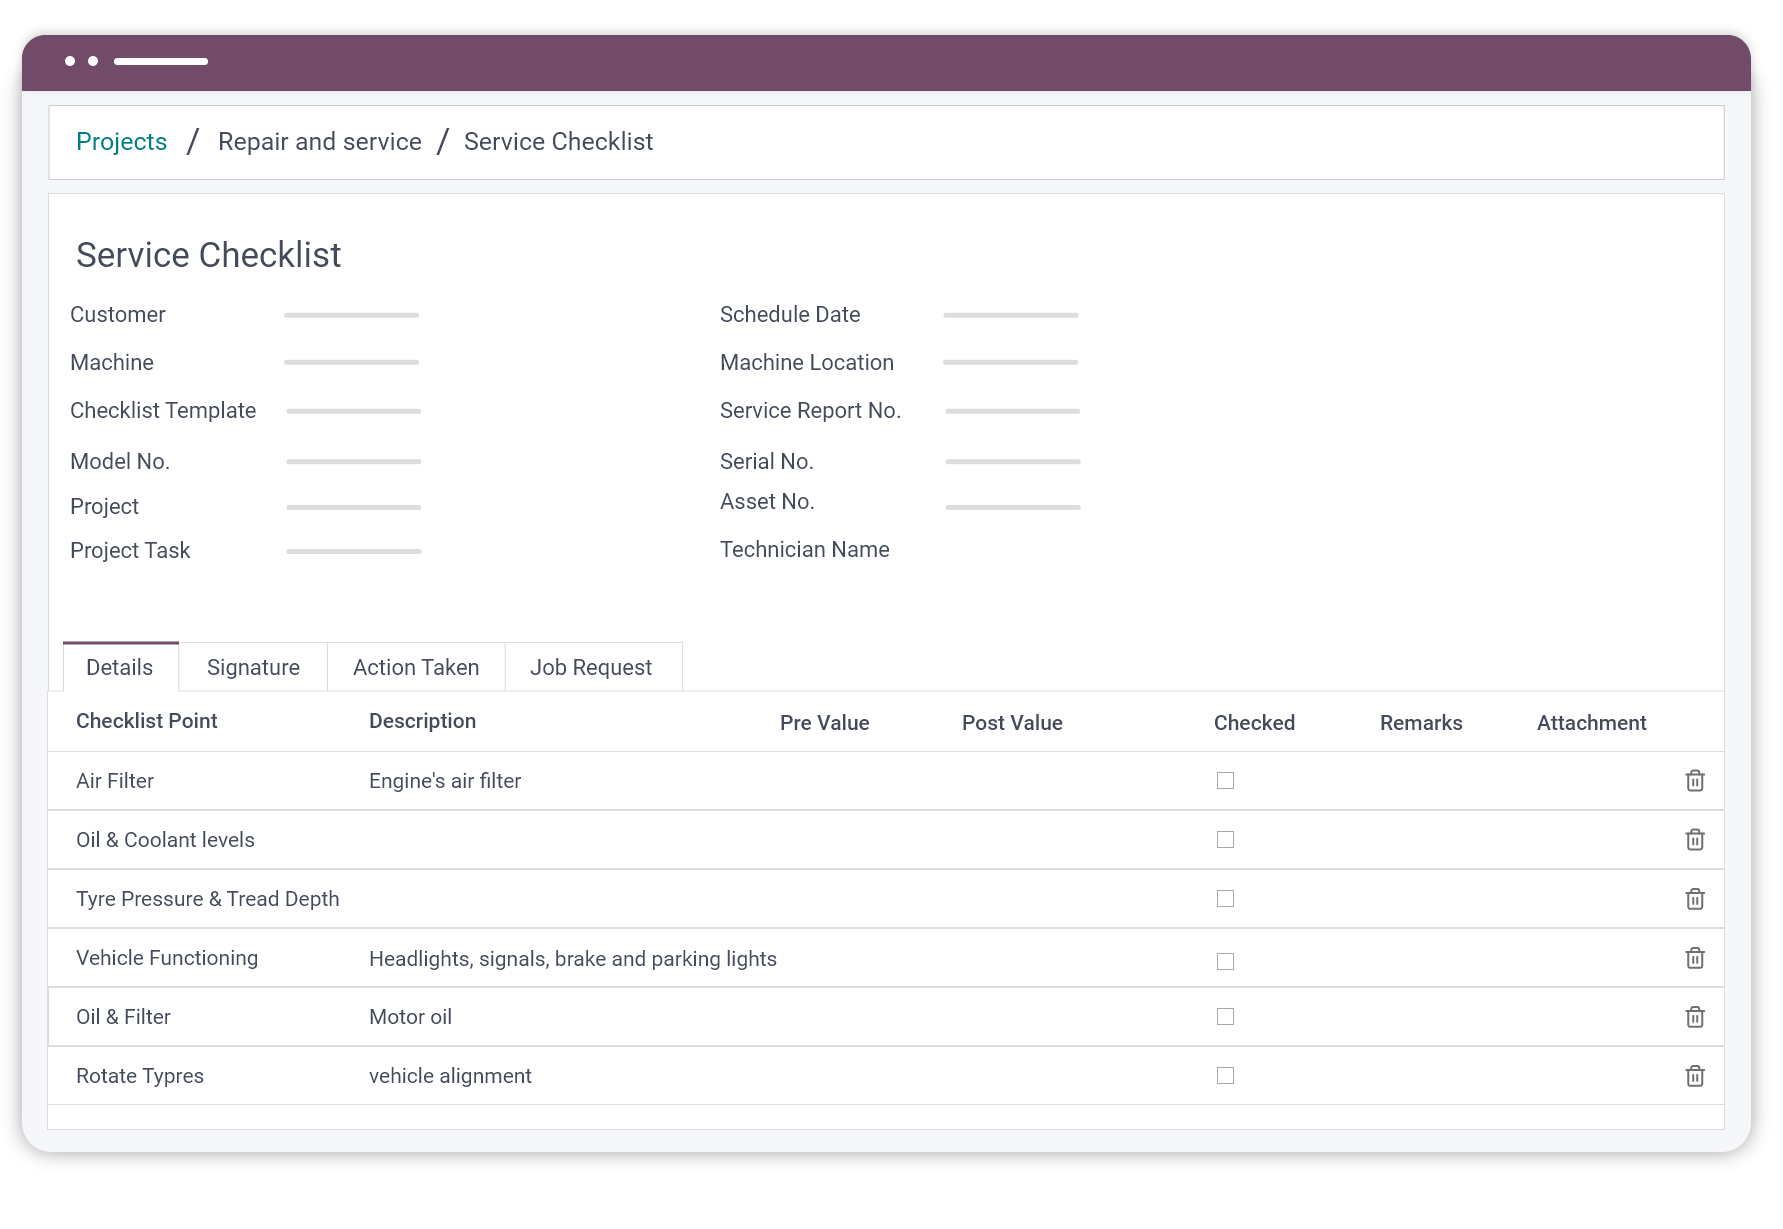 Odoo checklist template for clearer guidelines.